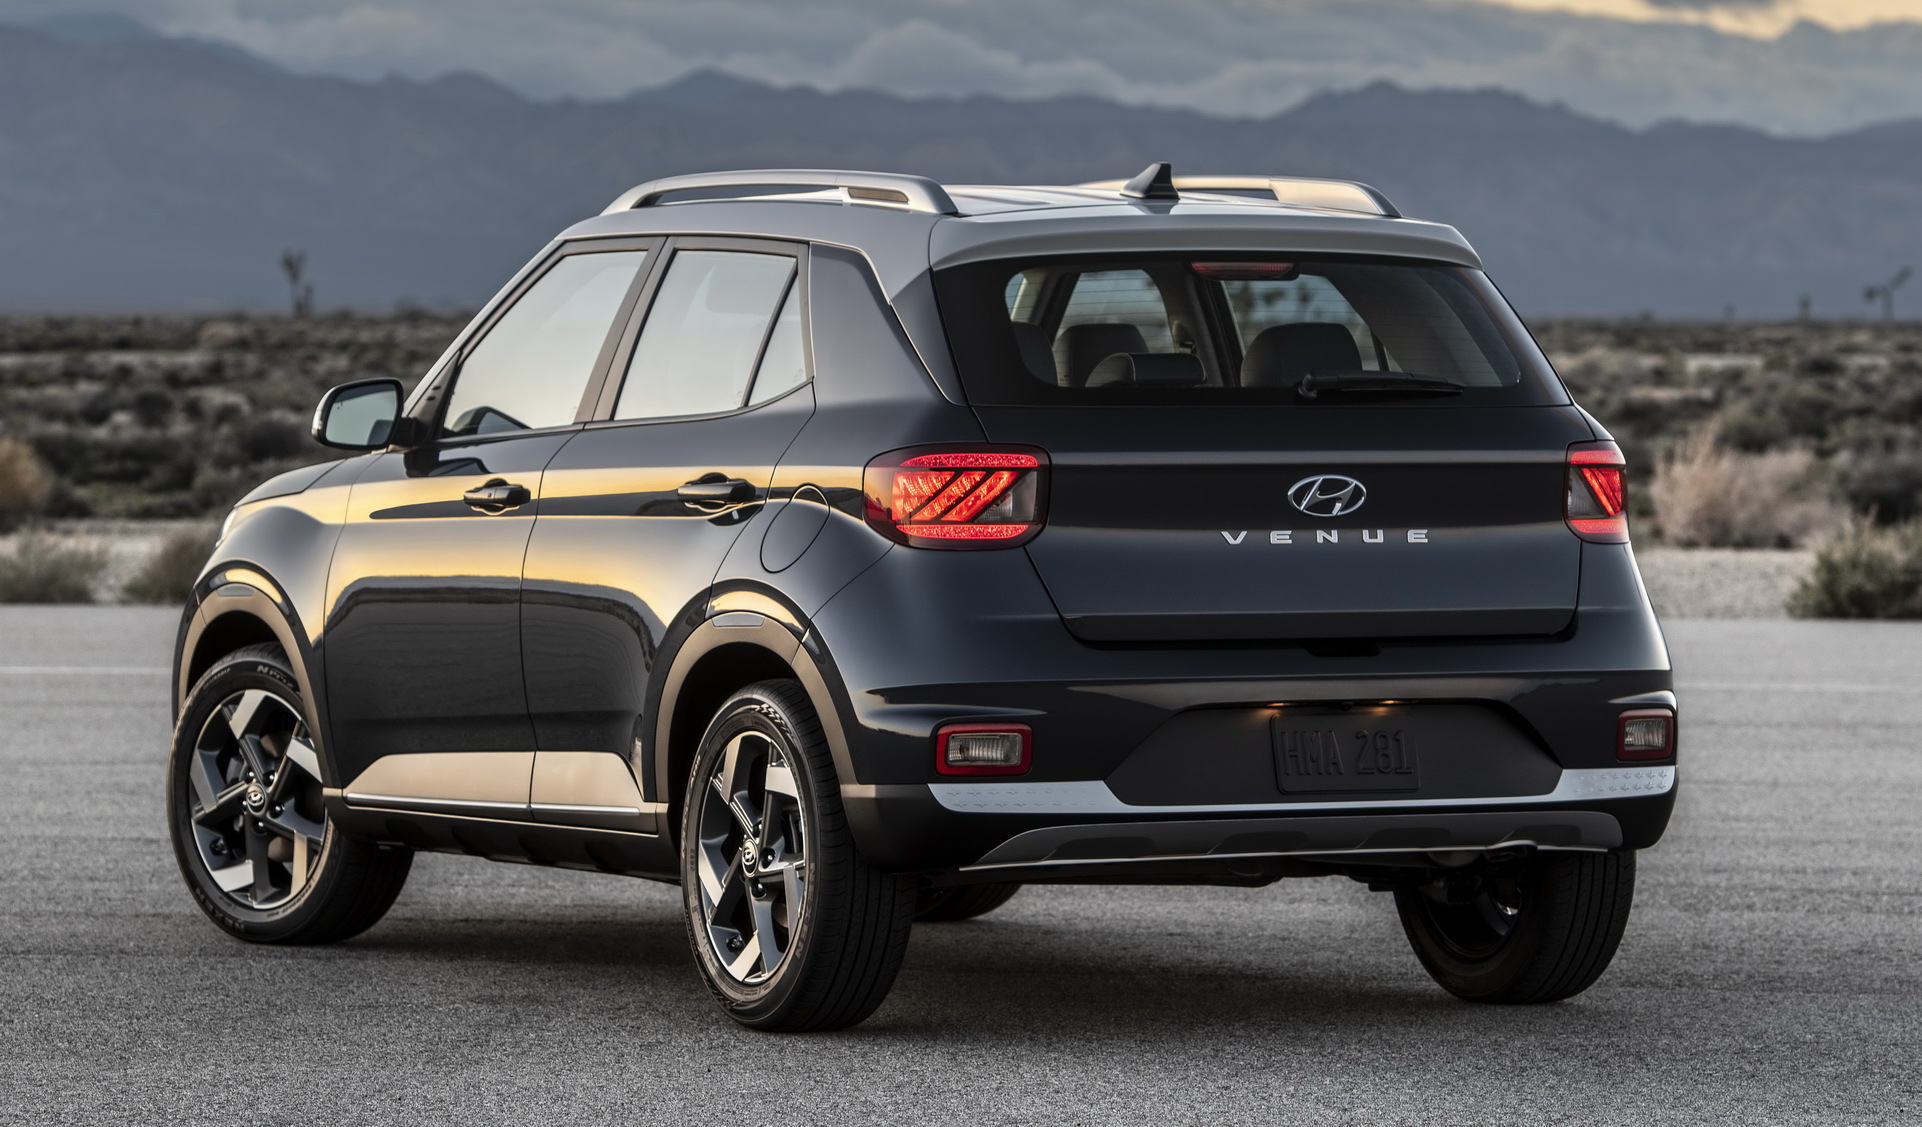 2020 Venue Is Hyundai's Most Affordable SUV At $17,250, But Is It The